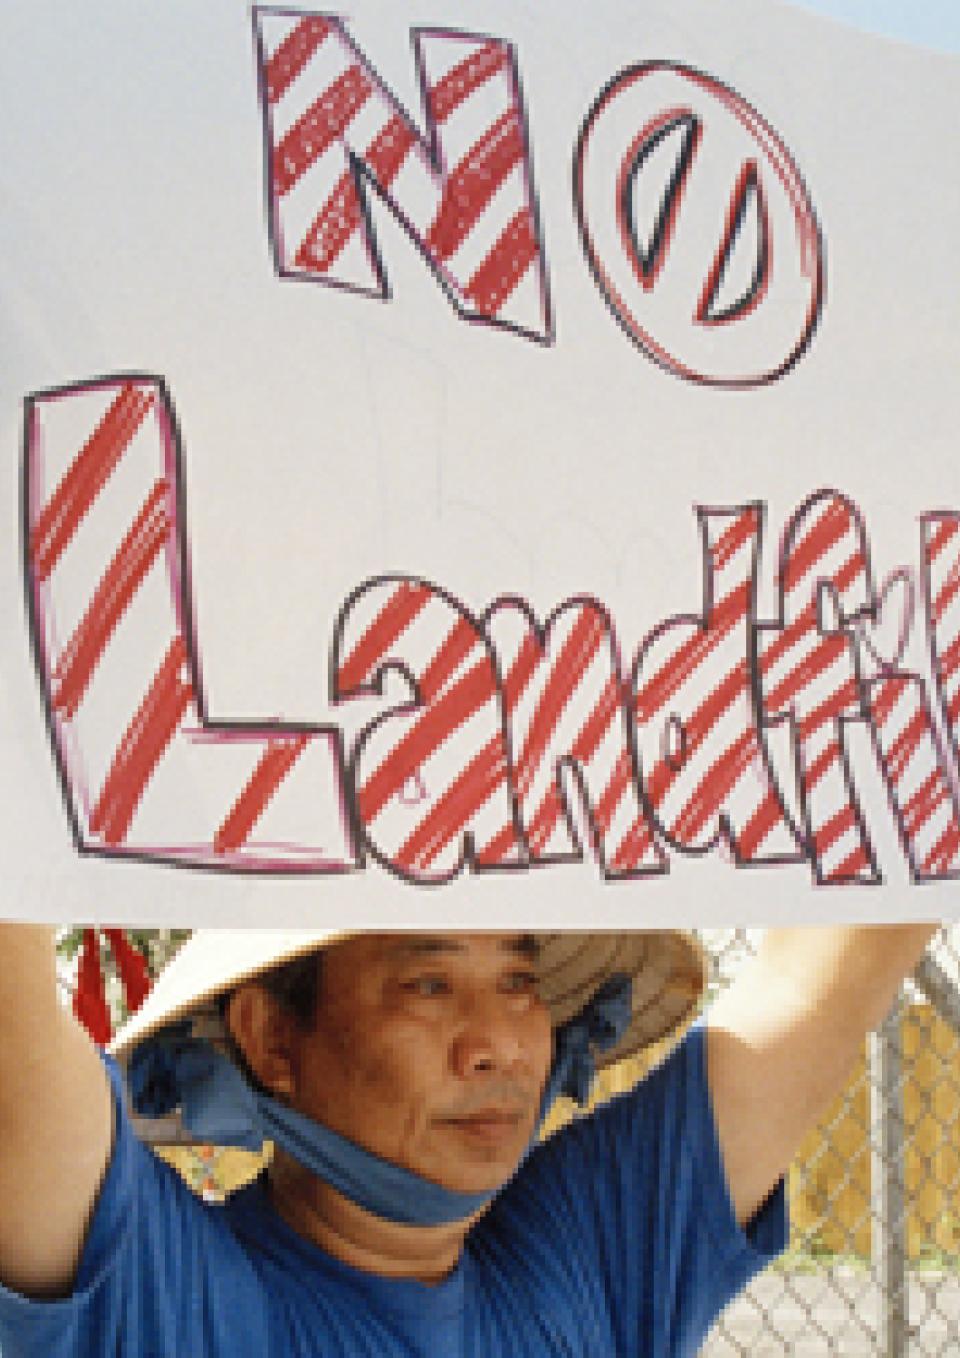  A still from the New Day film A Village Called Versailles. A Vietnamese person holds up a sign that reads “No Landfill” in large red and white striped letters. The “O” in “no” is a circle with a slash through it. They are wearing a conical hat tied under their chin with a large blue ribbon.